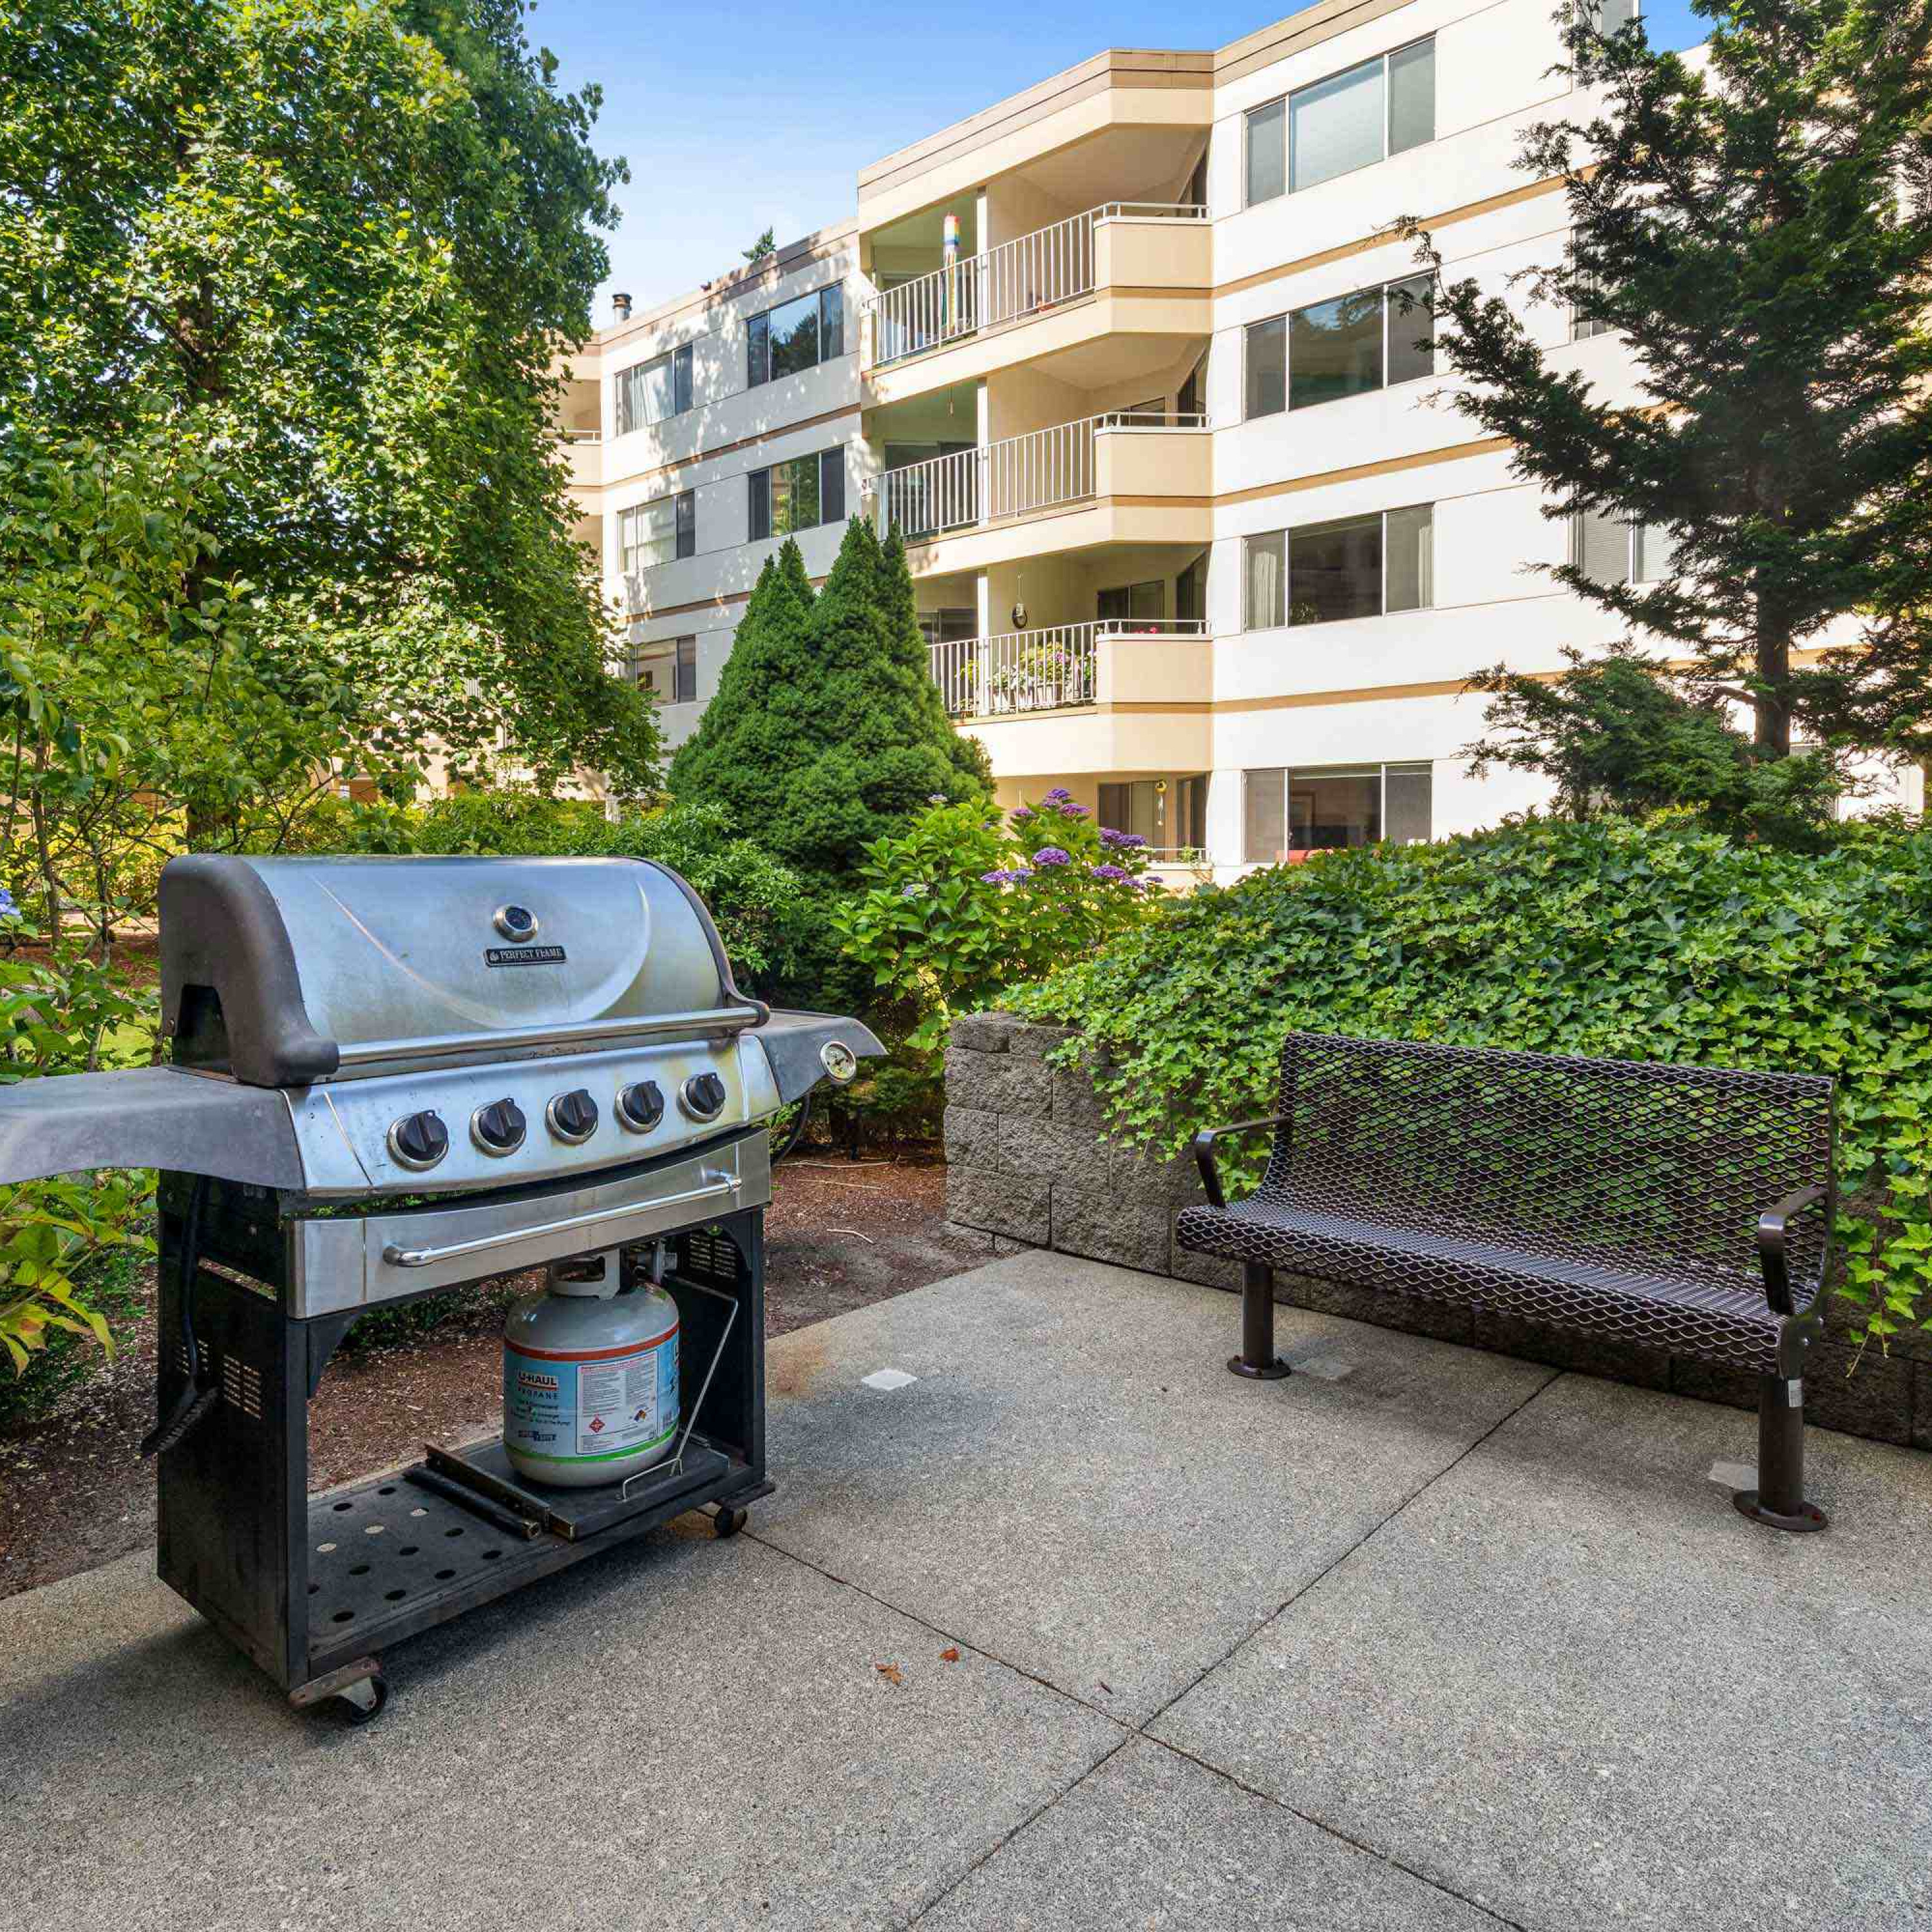 Grill for Cristwood residents' use